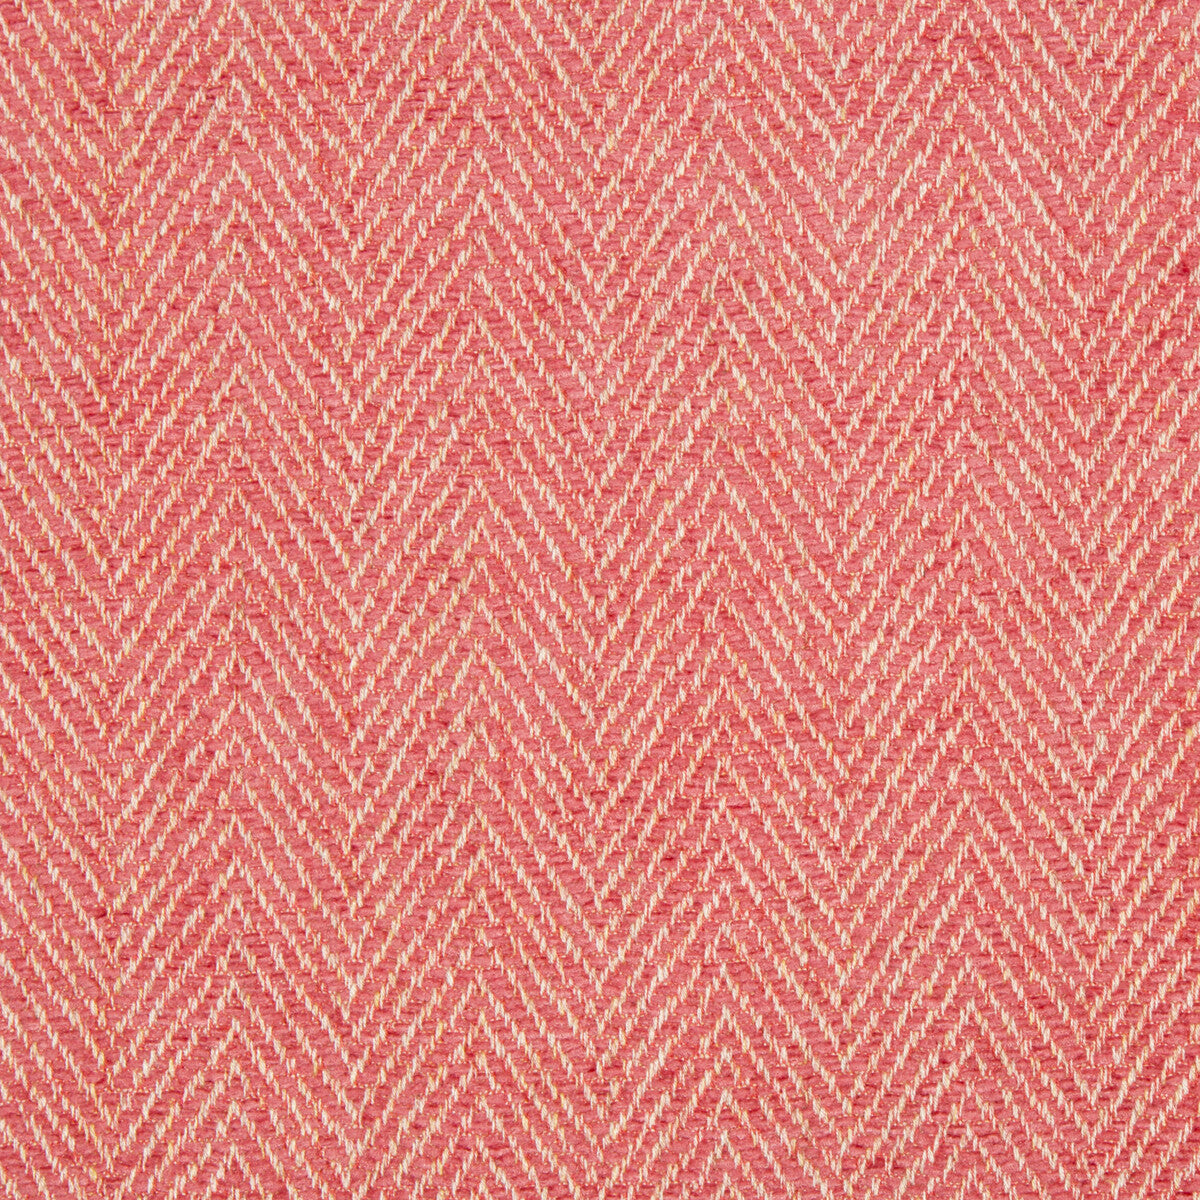 Firle Chenille II fabric in pink color - pattern 8017140.7.0 - by Brunschwig &amp; Fils in the Baronet collection